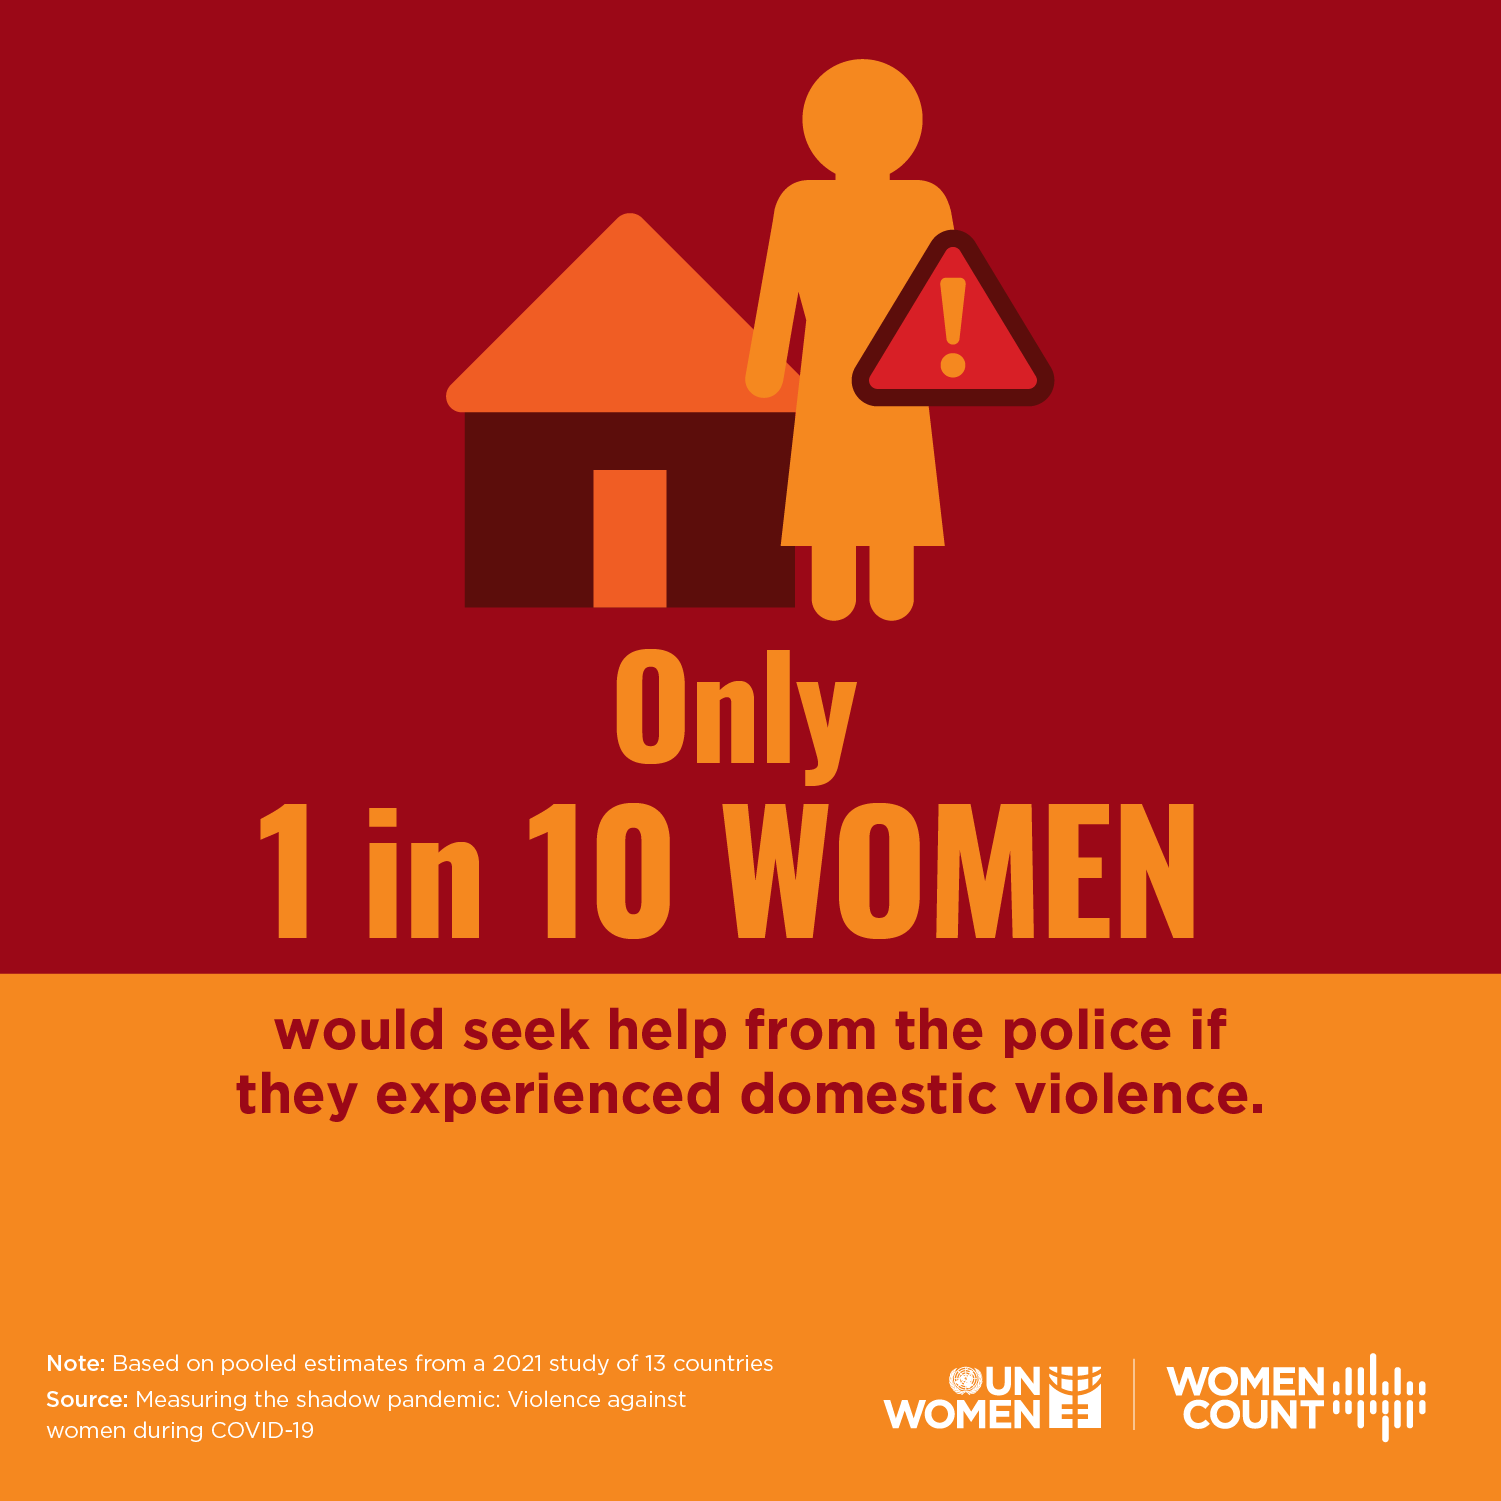 Only 1 in 10 women would seek help from the police if they experienced domestic violence.